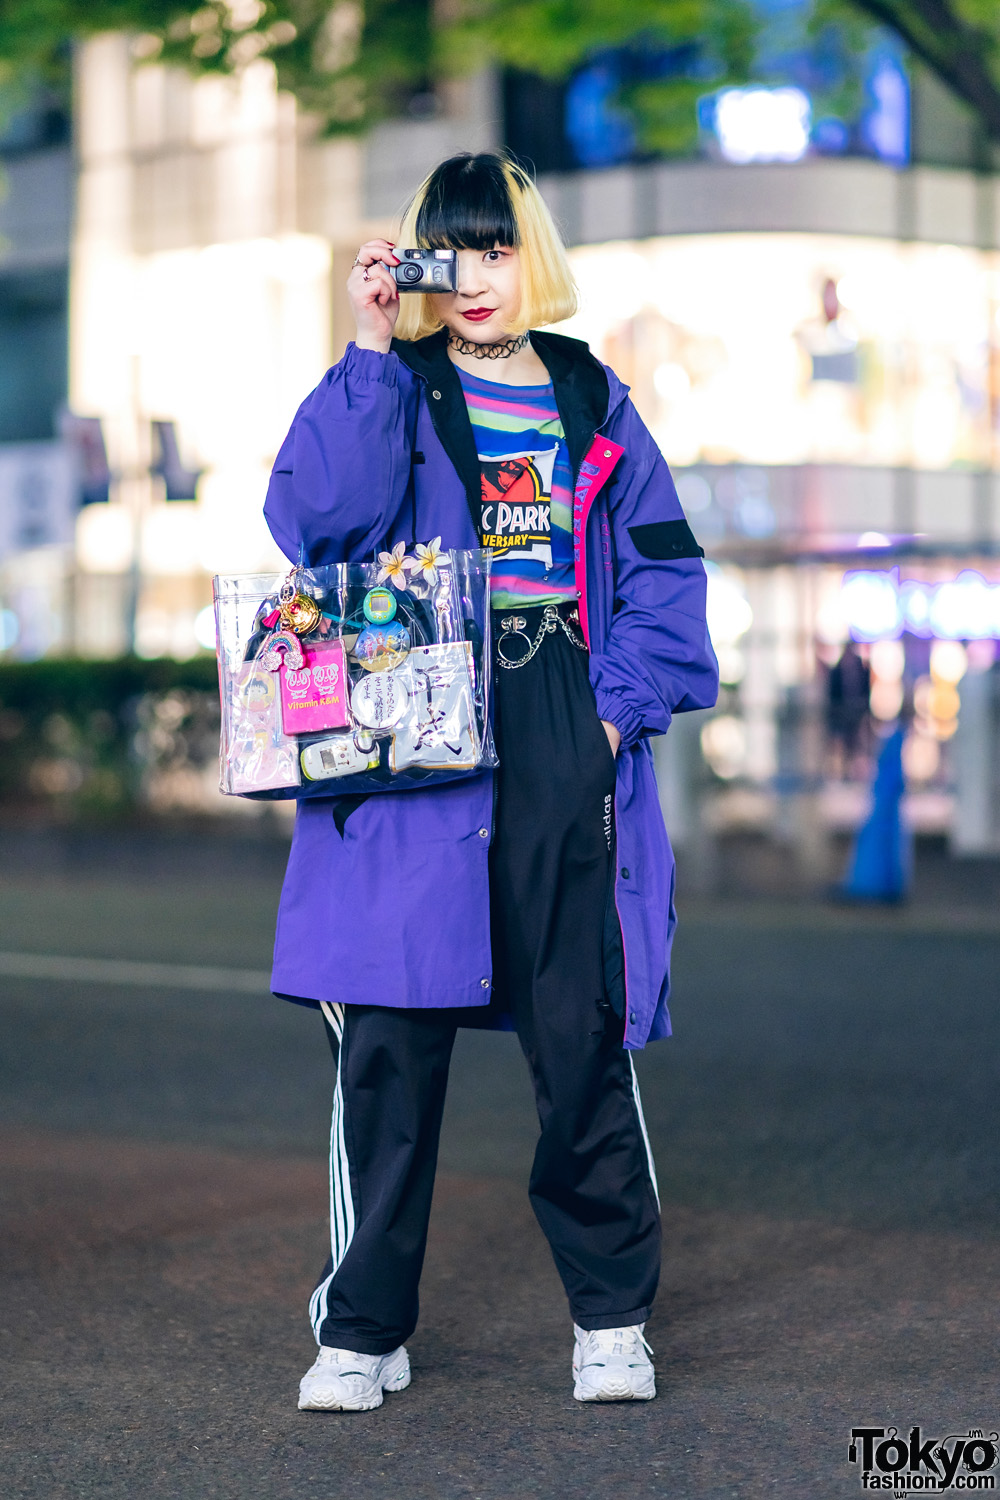 Casual Tokyo Style w/ Two-Tone Hair, Jurassic Park Shirt, Adidas Track Pants, Tokyu Hands Clear Tote & Sketchers Sneakers